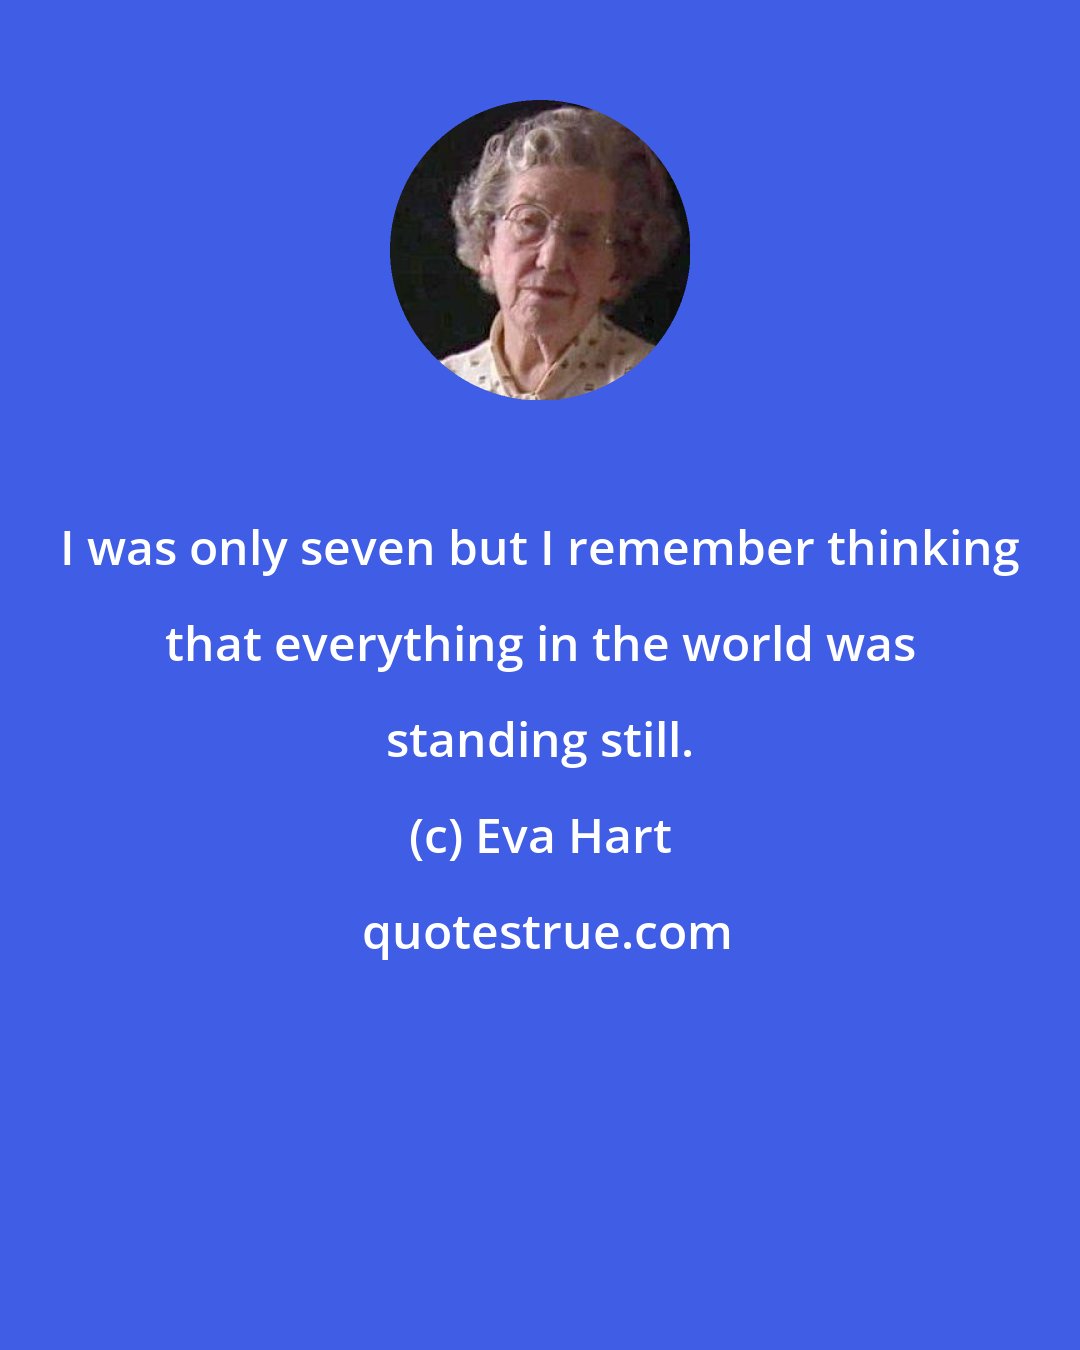 Eva Hart: I was only seven but I remember thinking that everything in the world was standing still.